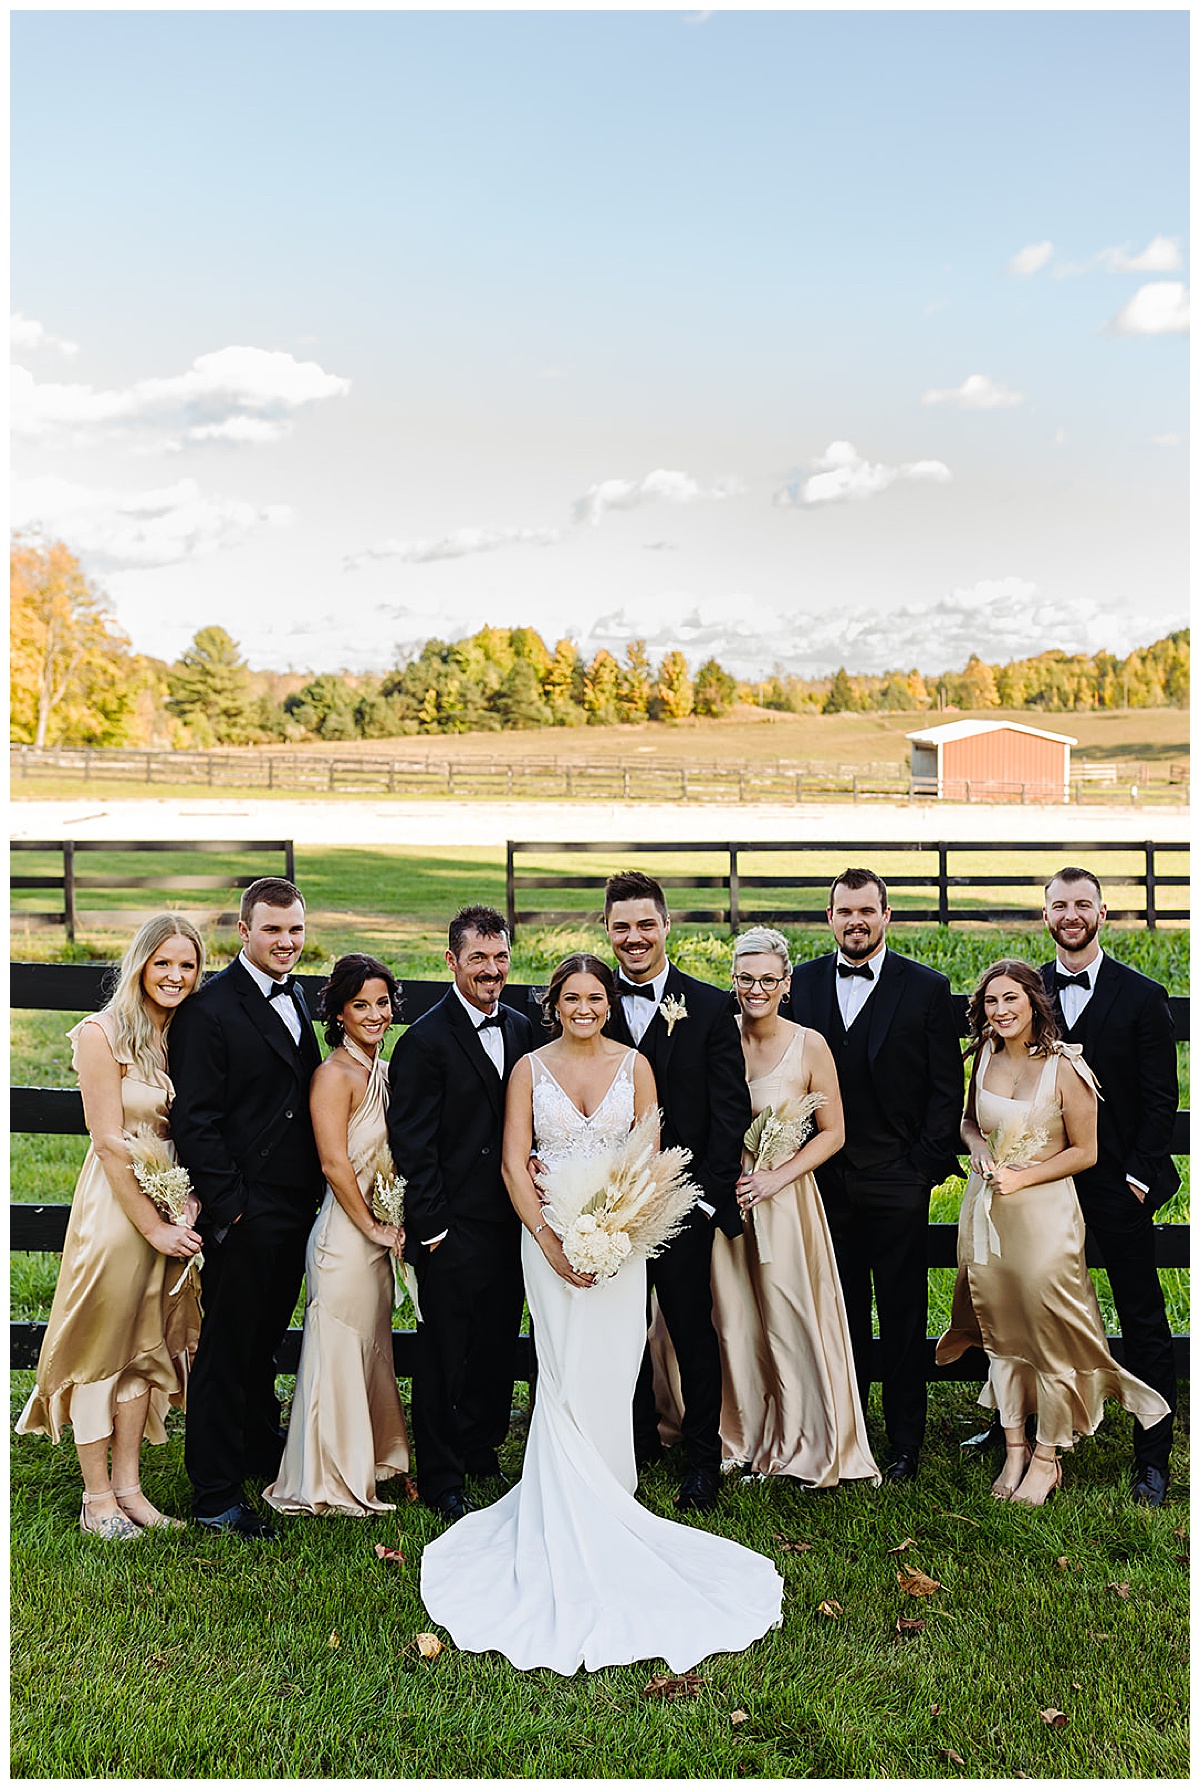 Wedding party smile together for Kayla Bouren Photography